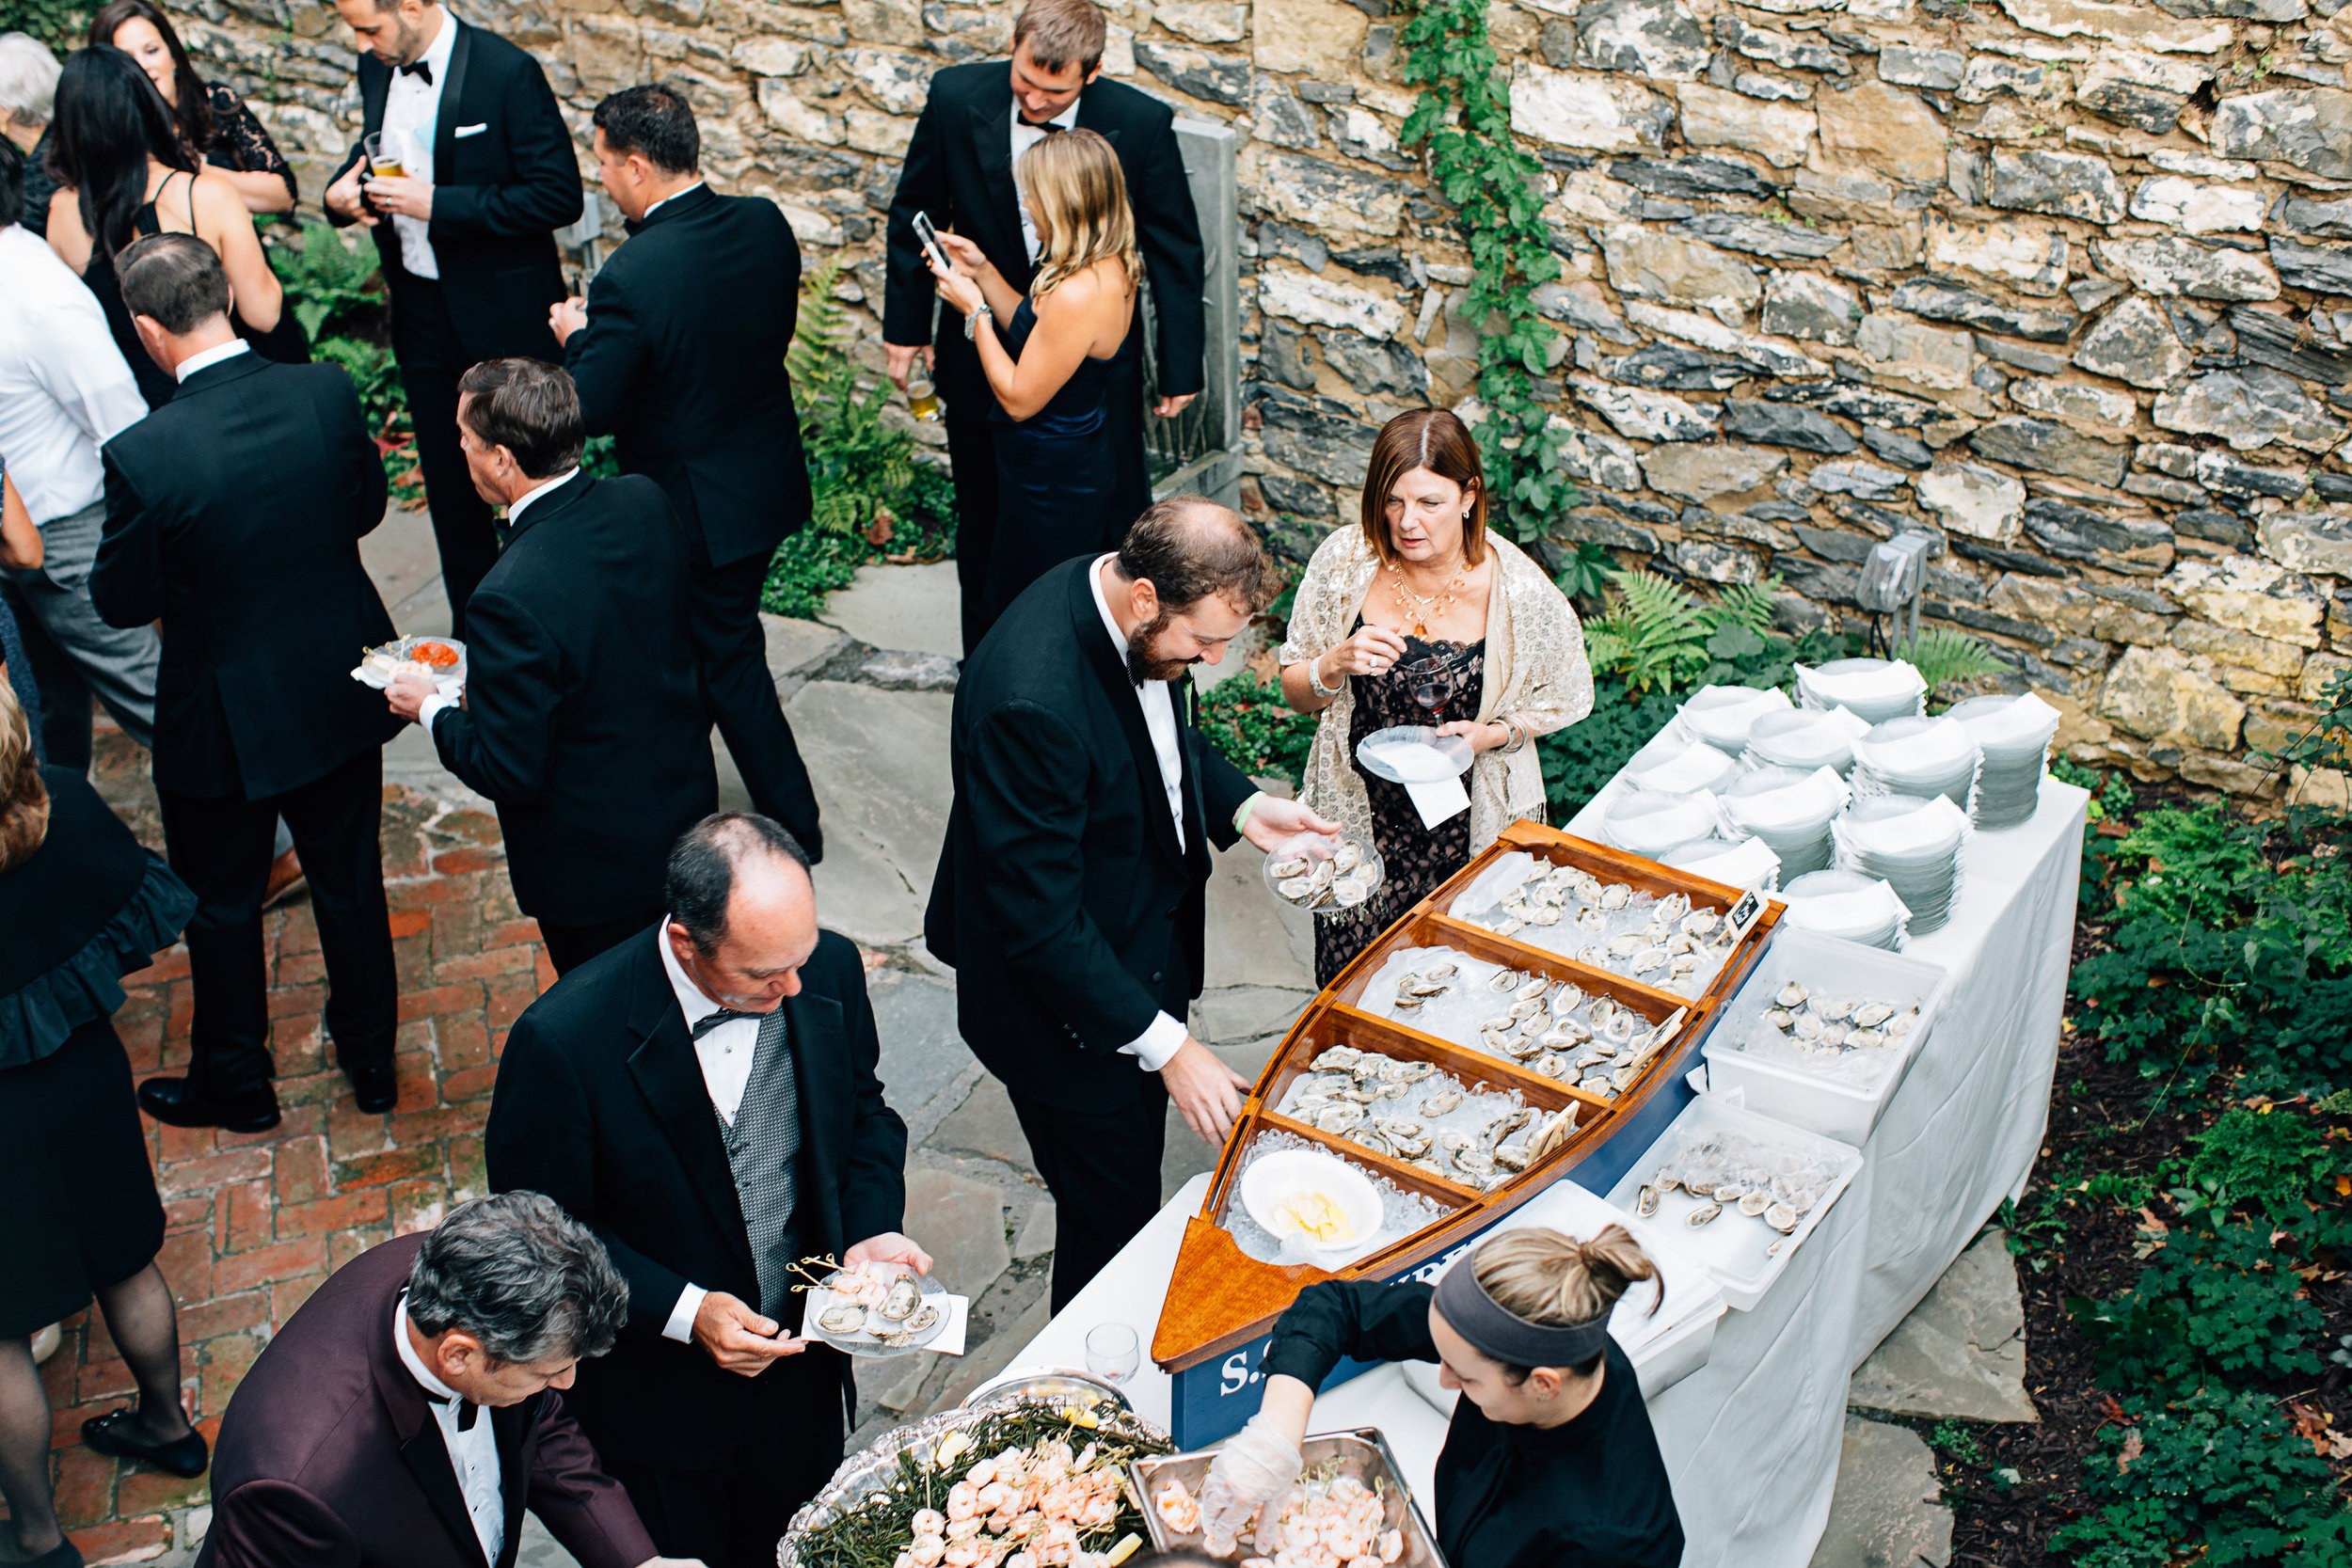 Guests serving themselves from a food station featuring a large realistic boat with oysters